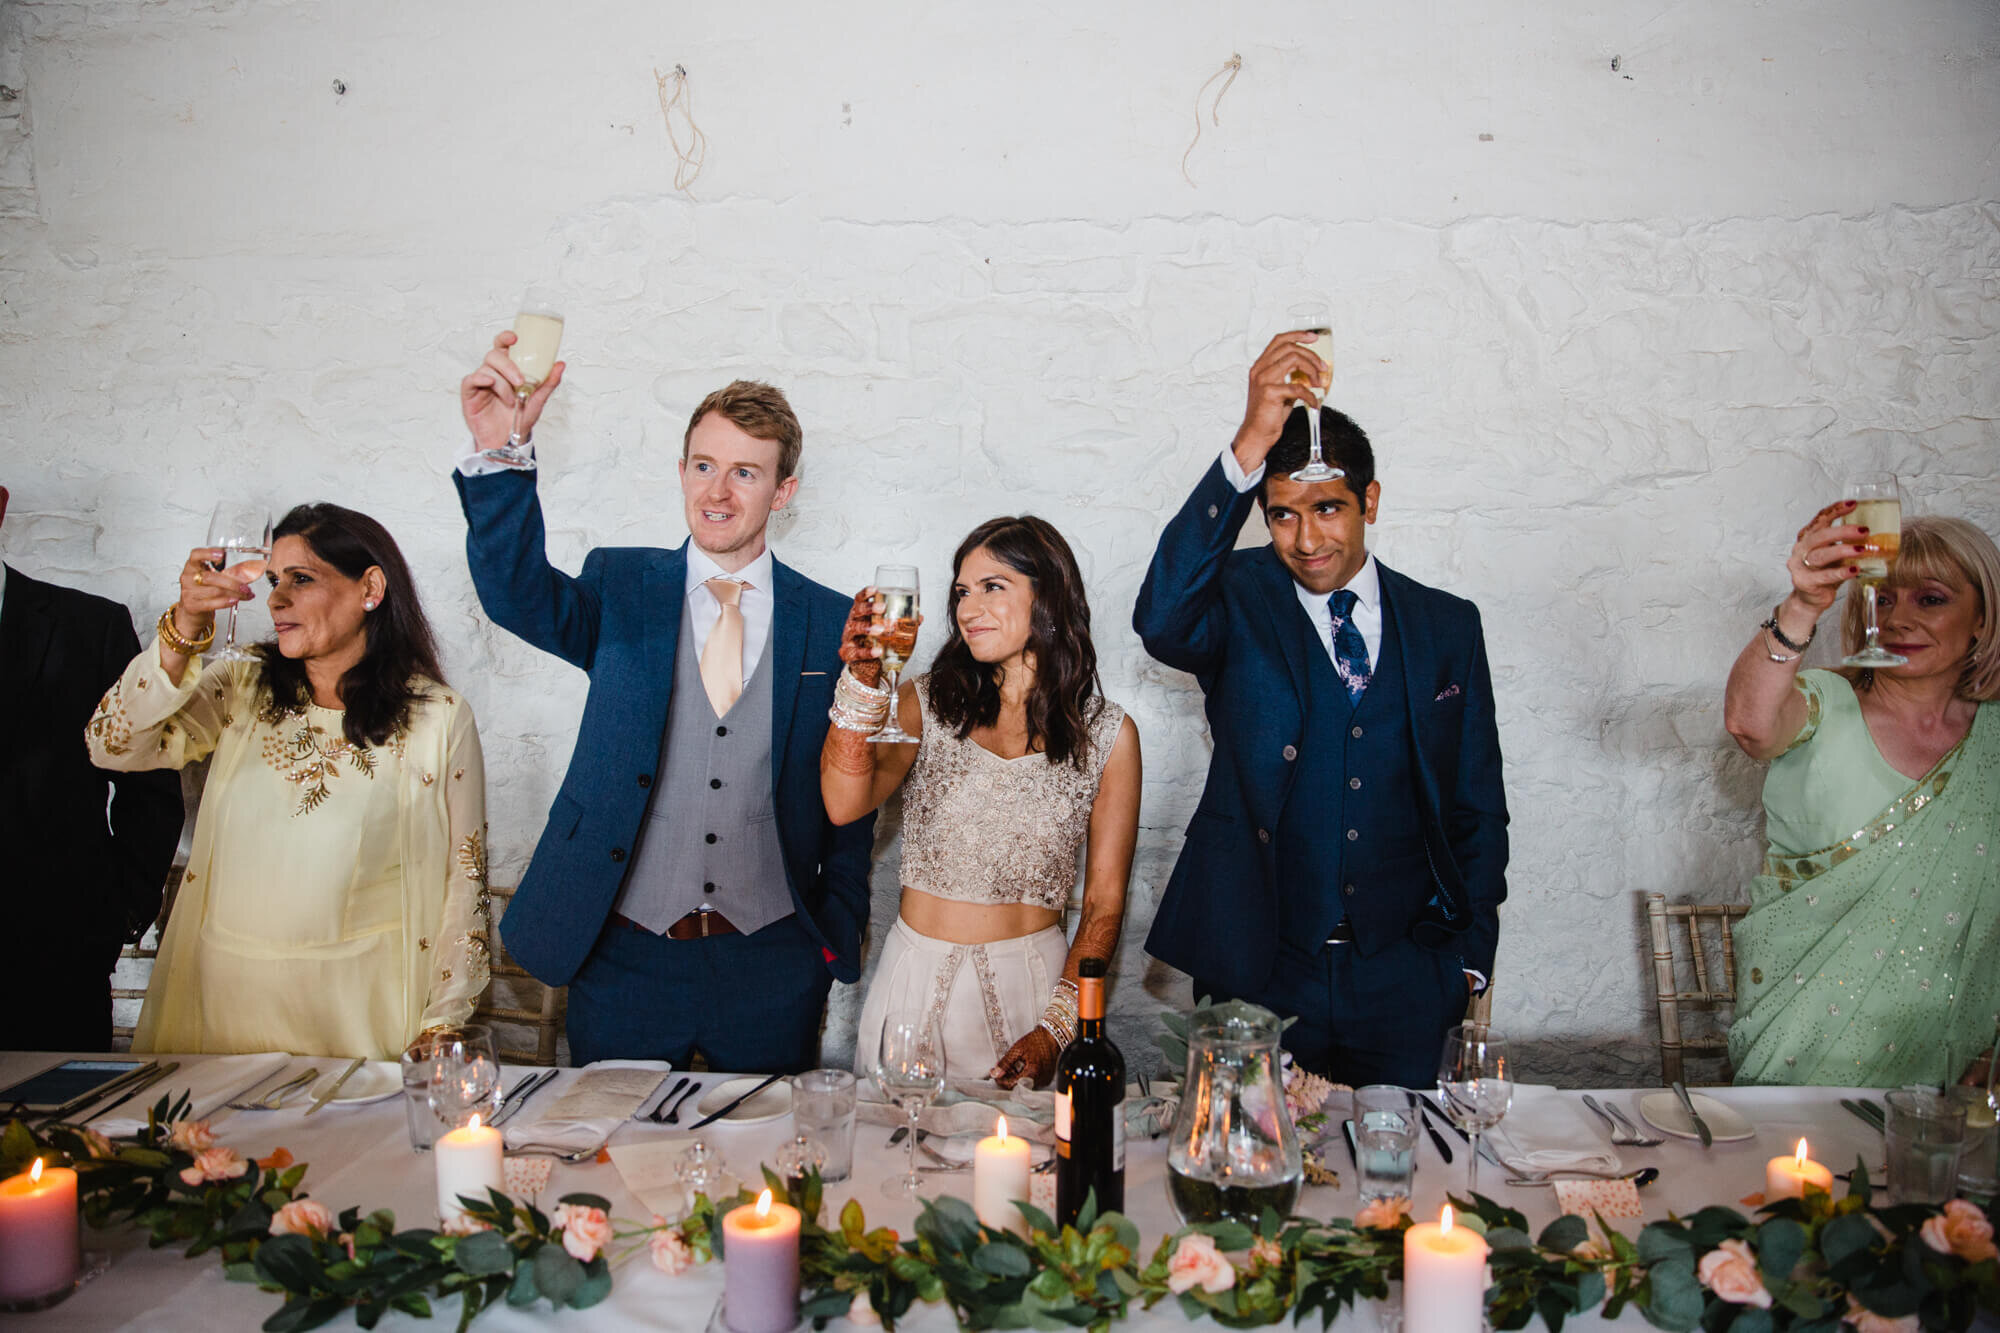 wedding party raise toast with drinks glasses at end of speech